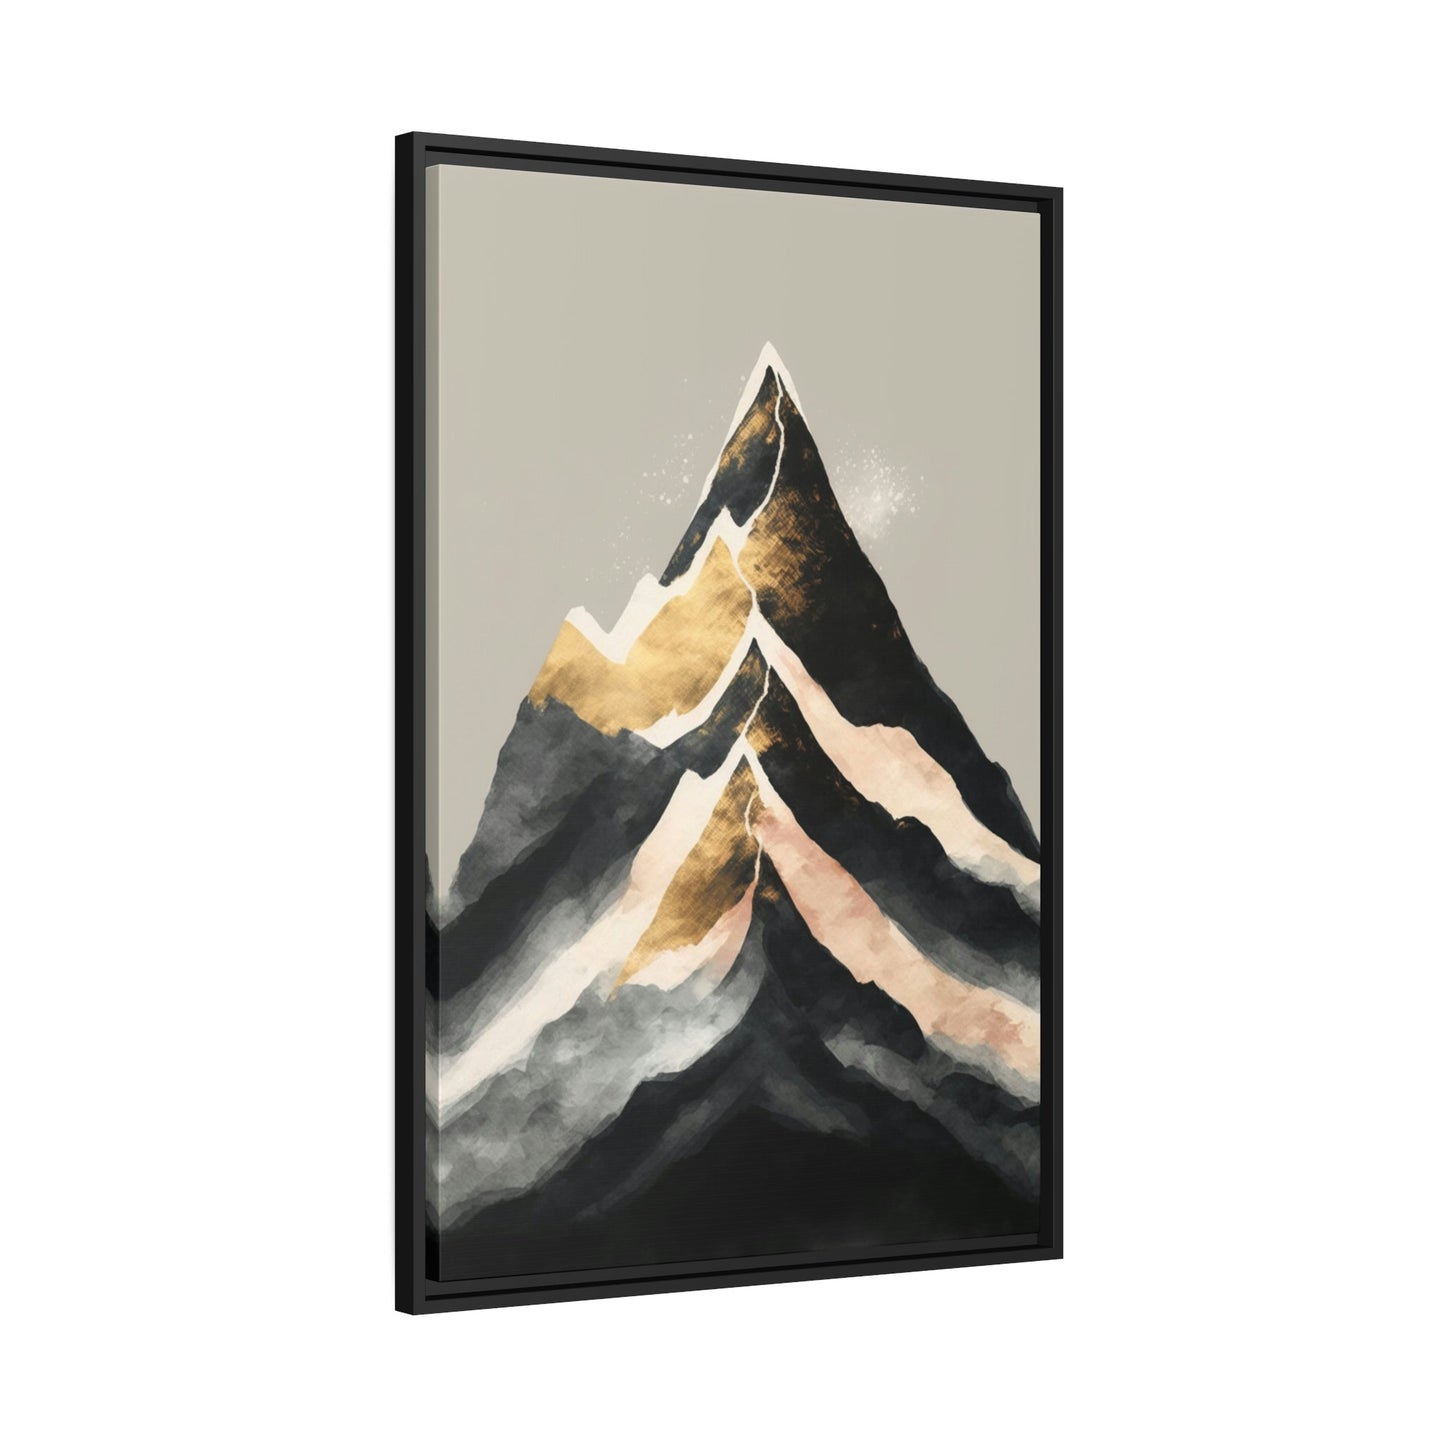 Harmony of Forms: A Natural Canvas & Poster Wall Art of an Abstract Landscape